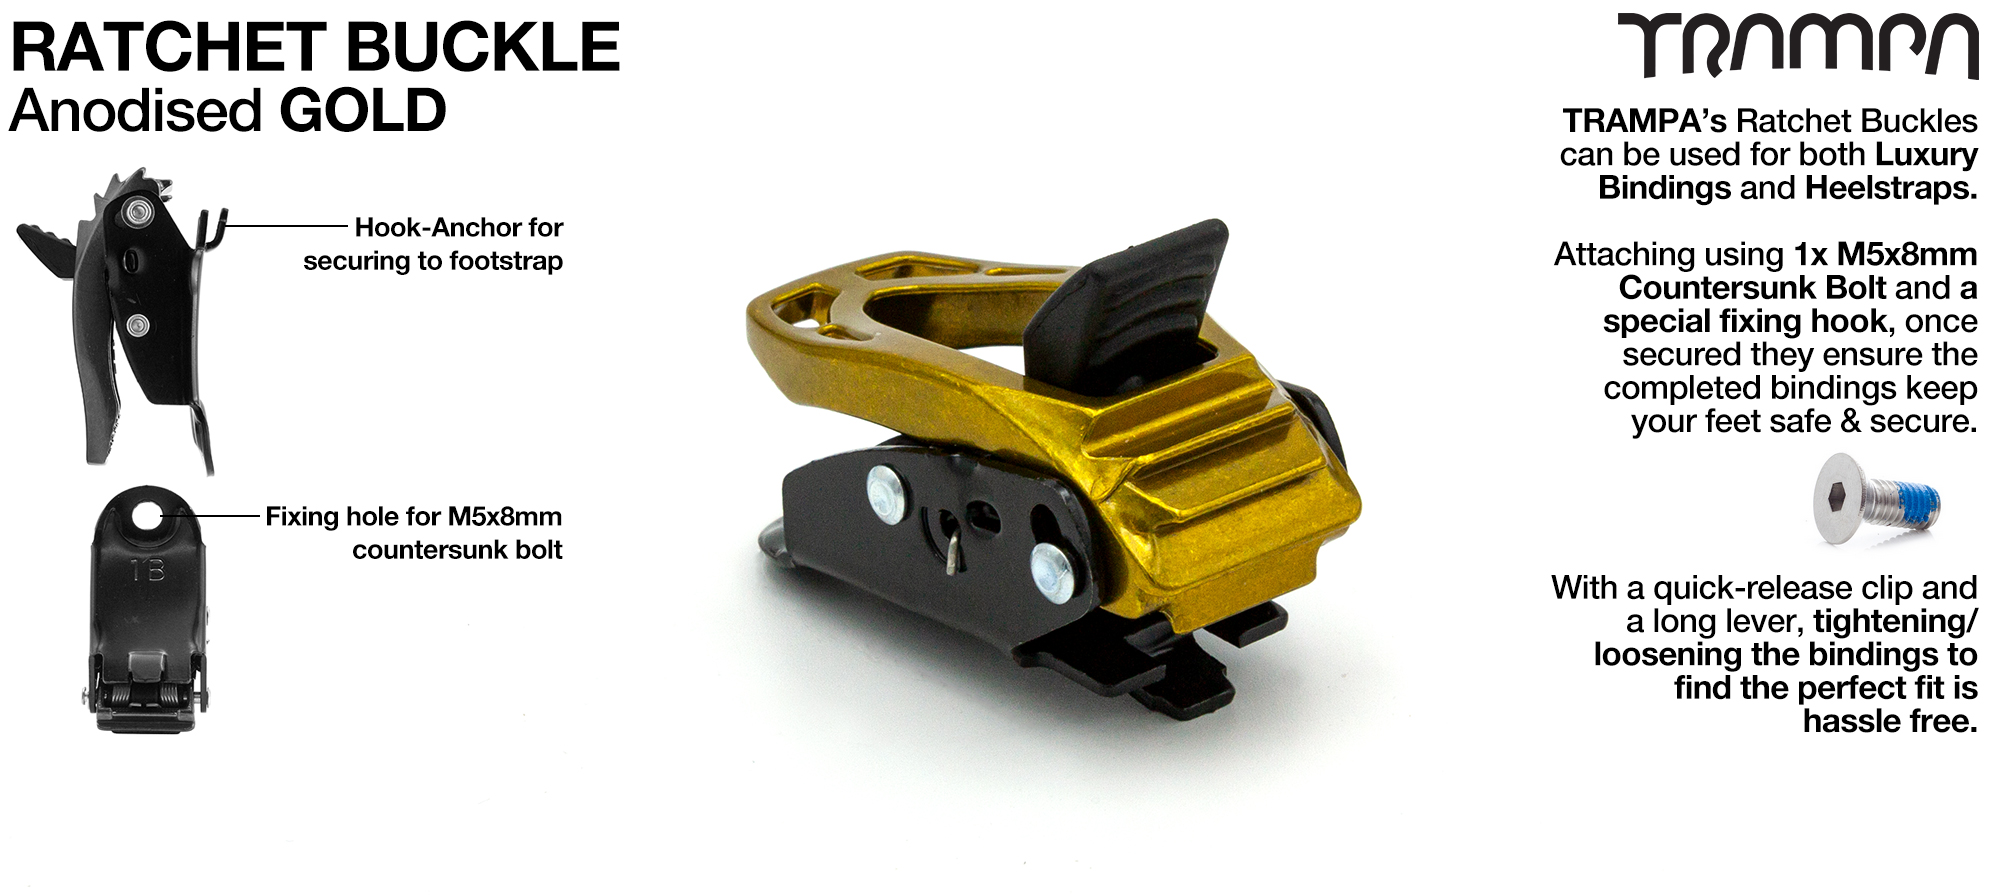 Ratchet Buckle Anodised GOLD